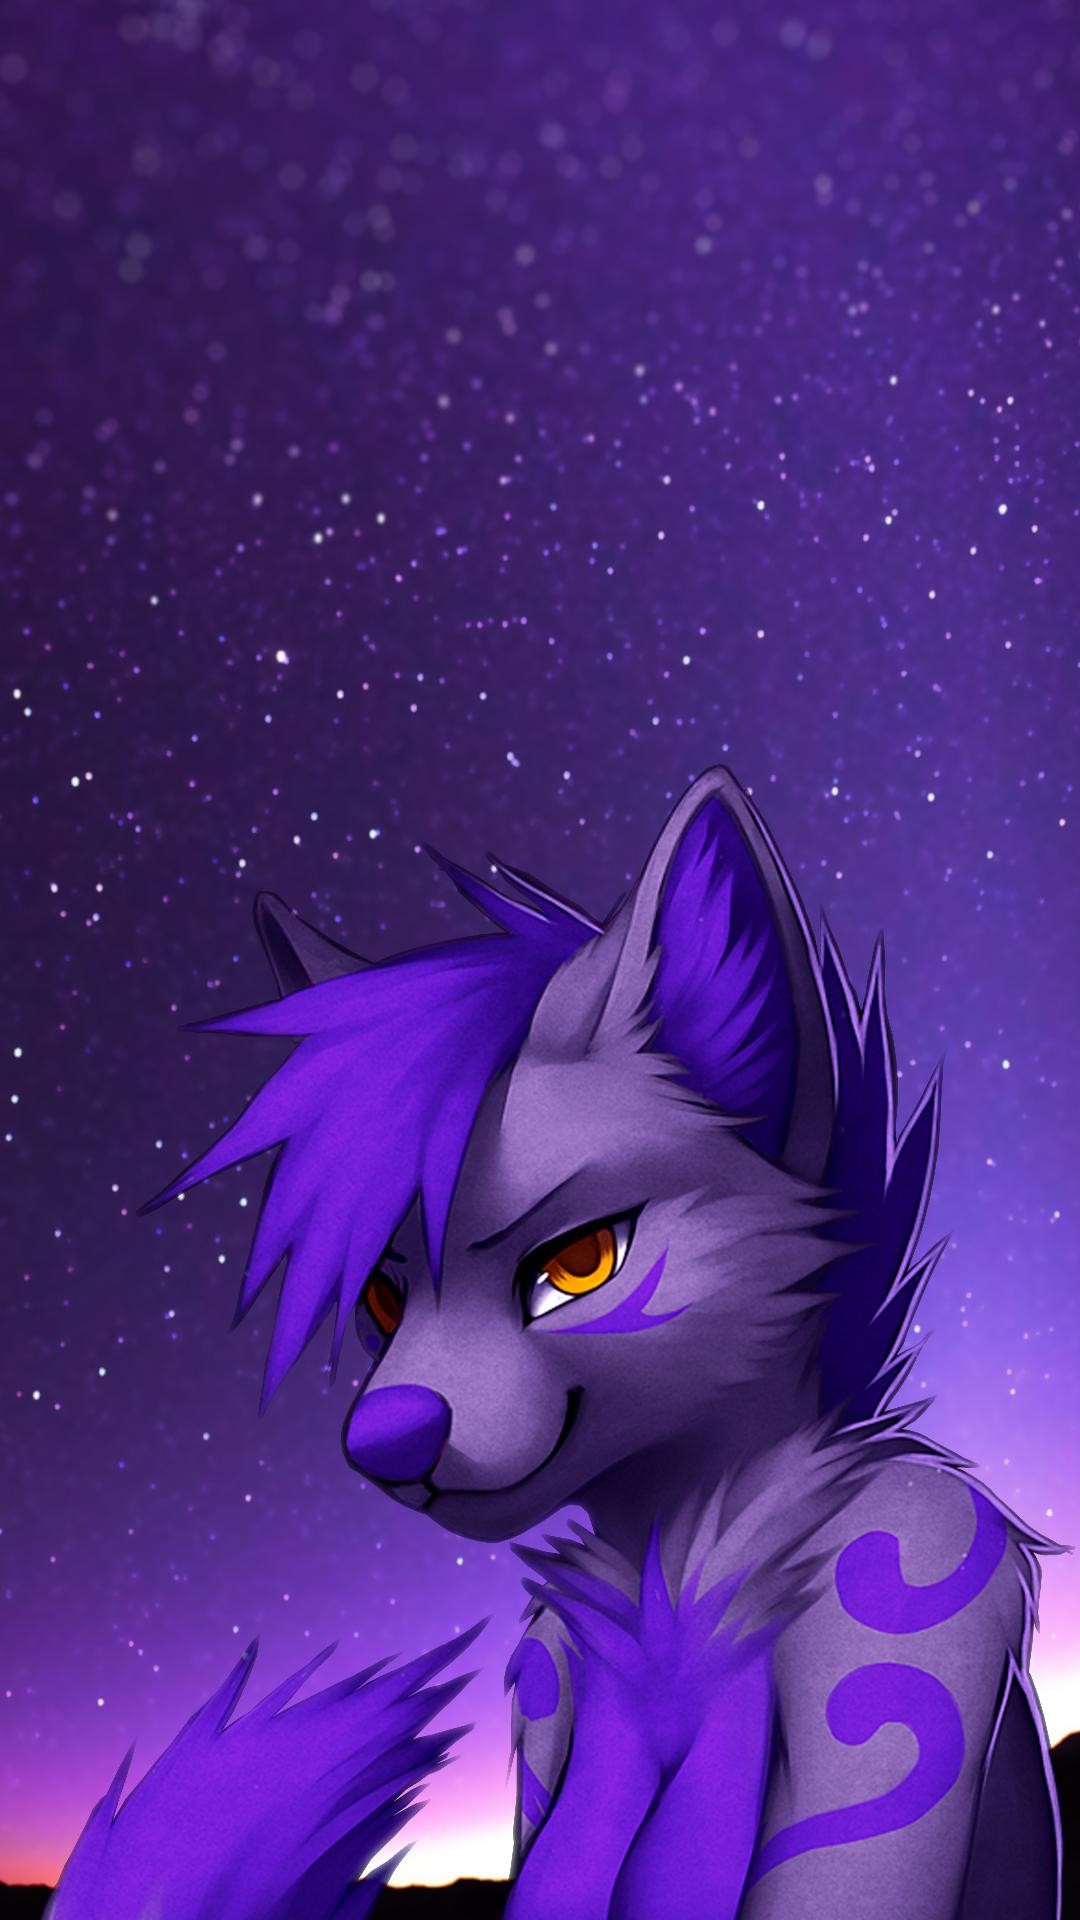 1080x1920 I recently discovered Falvie's art and got a new smartphone. I got a little  too carried away on making backgrounds for my phone... : furry